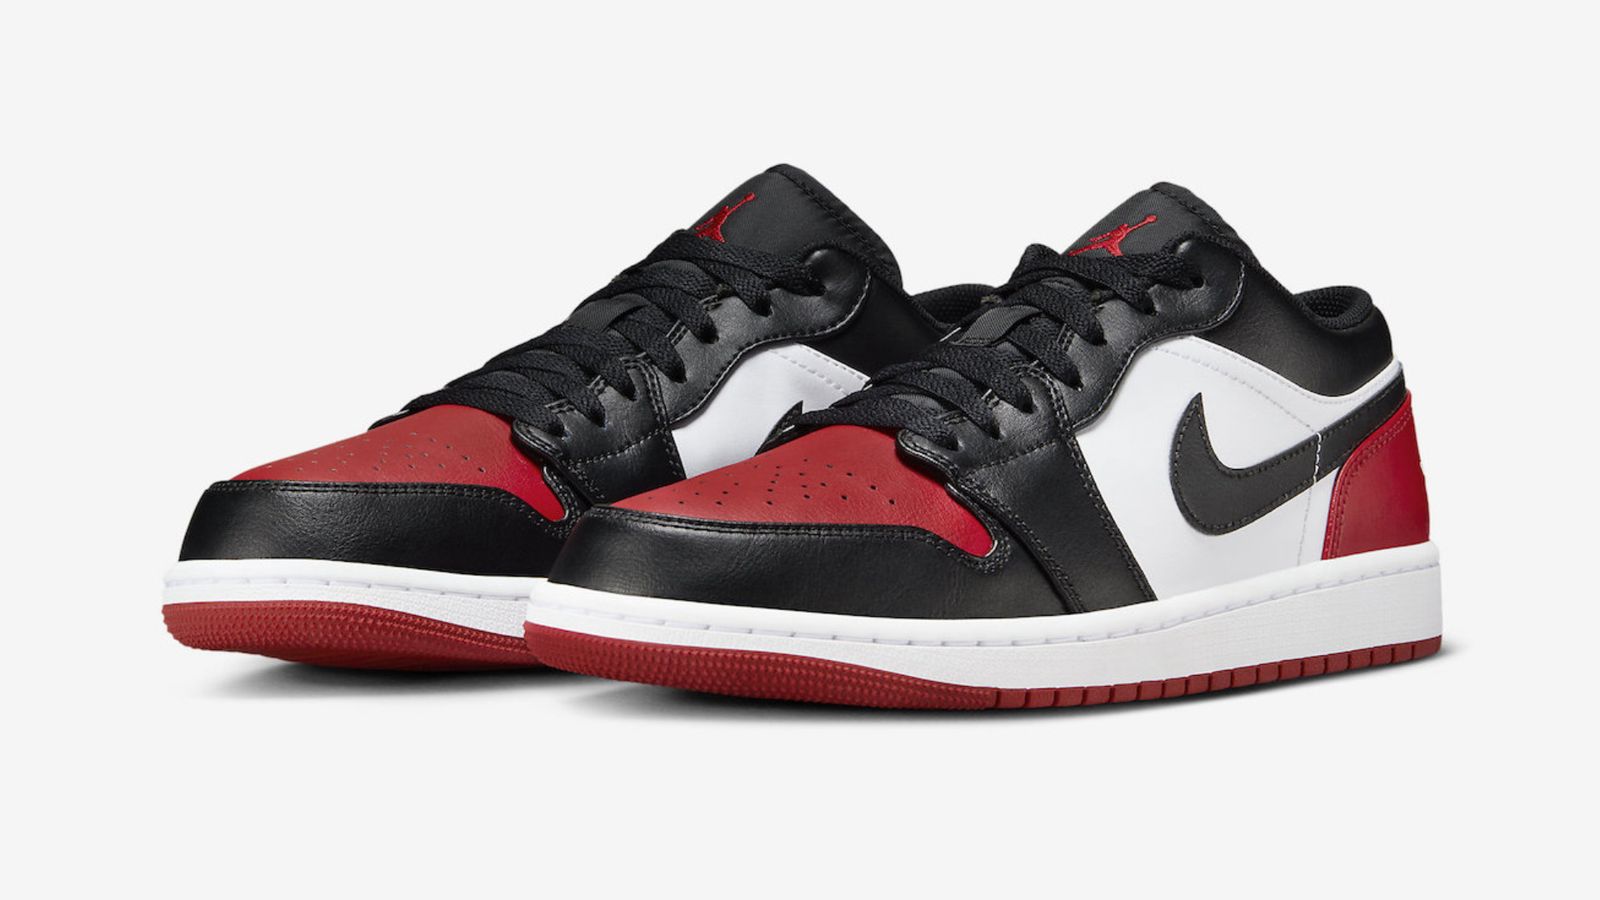 Air Jordan 1 Low "Bred Toe 2.0" product image of a white, black, and red leather Jordan 1 Low.